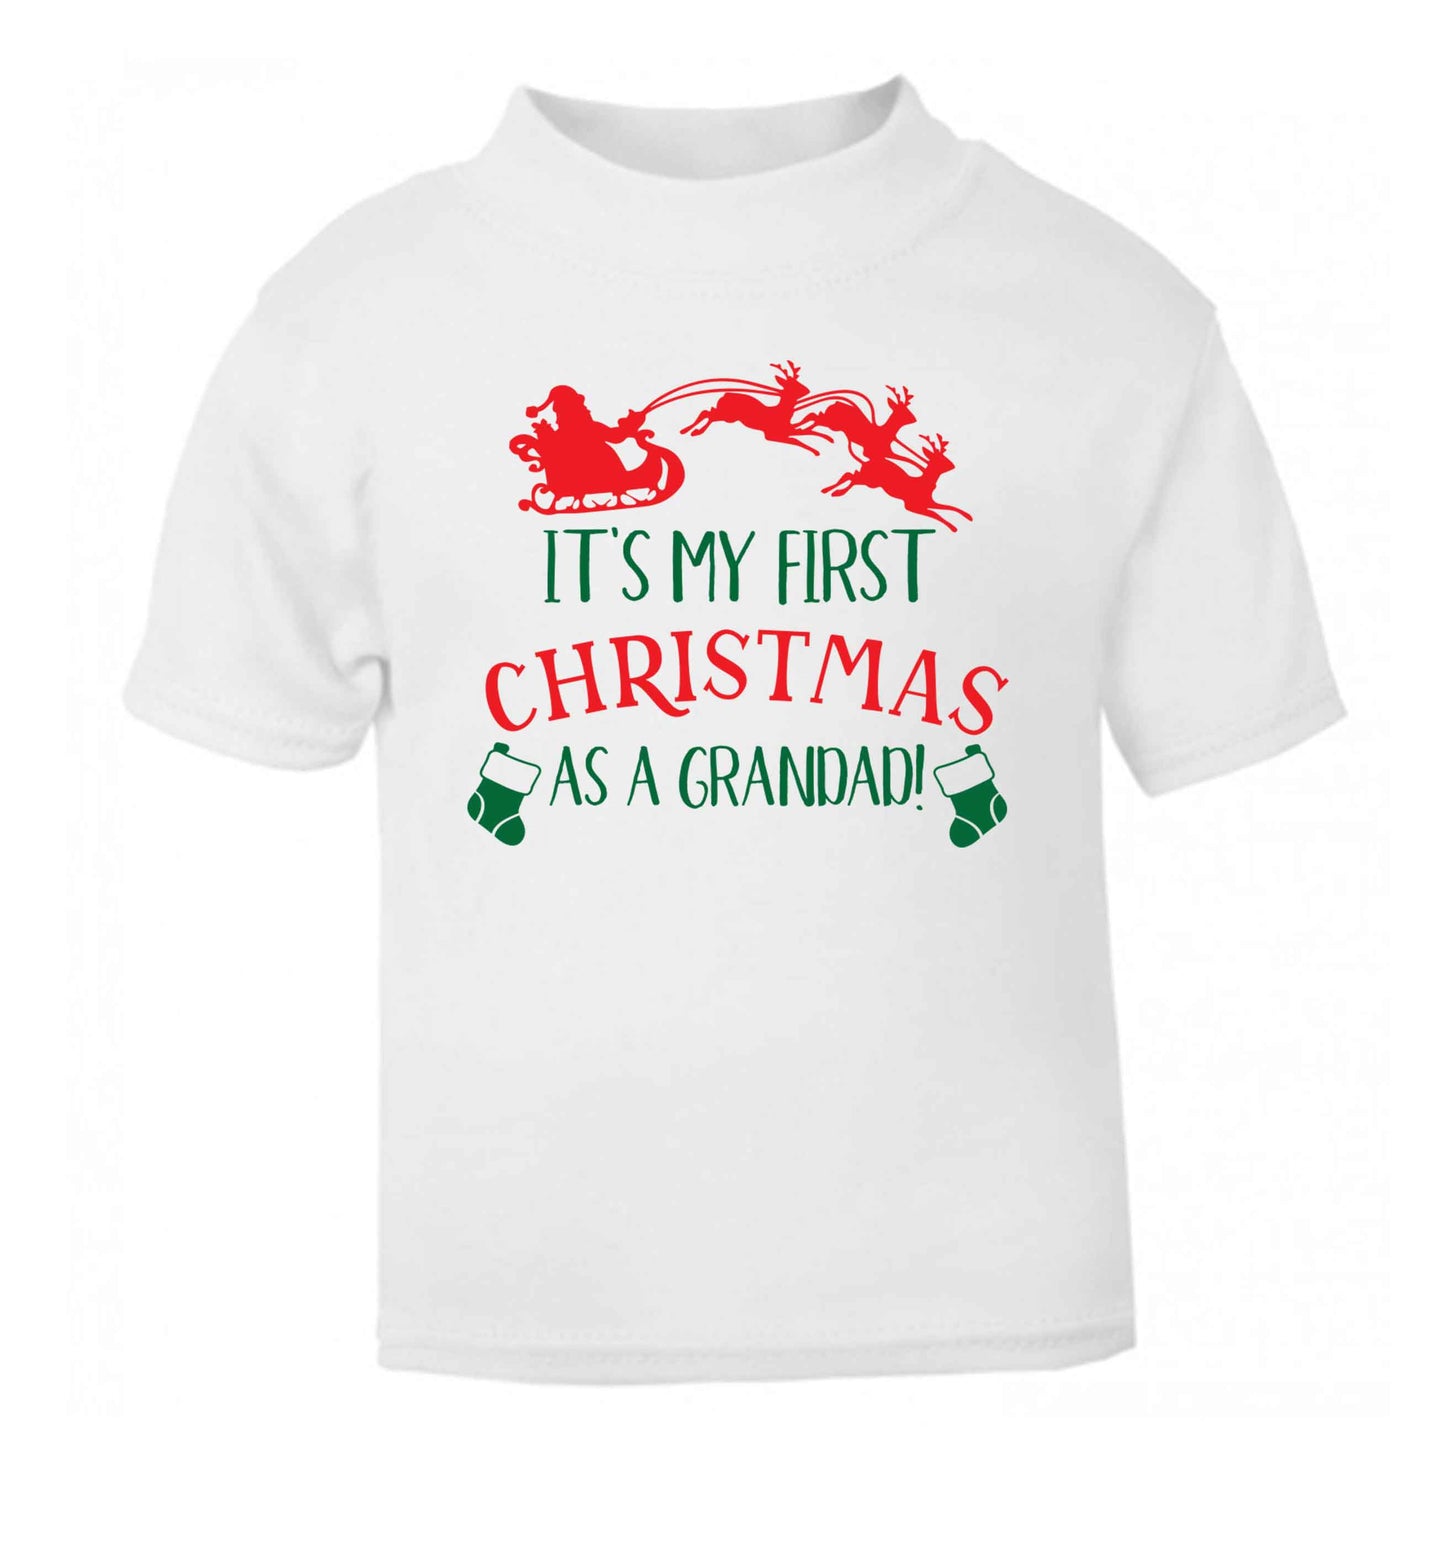 It's my first Christmas as a grandad! white Baby Toddler Tshirt 2 Years